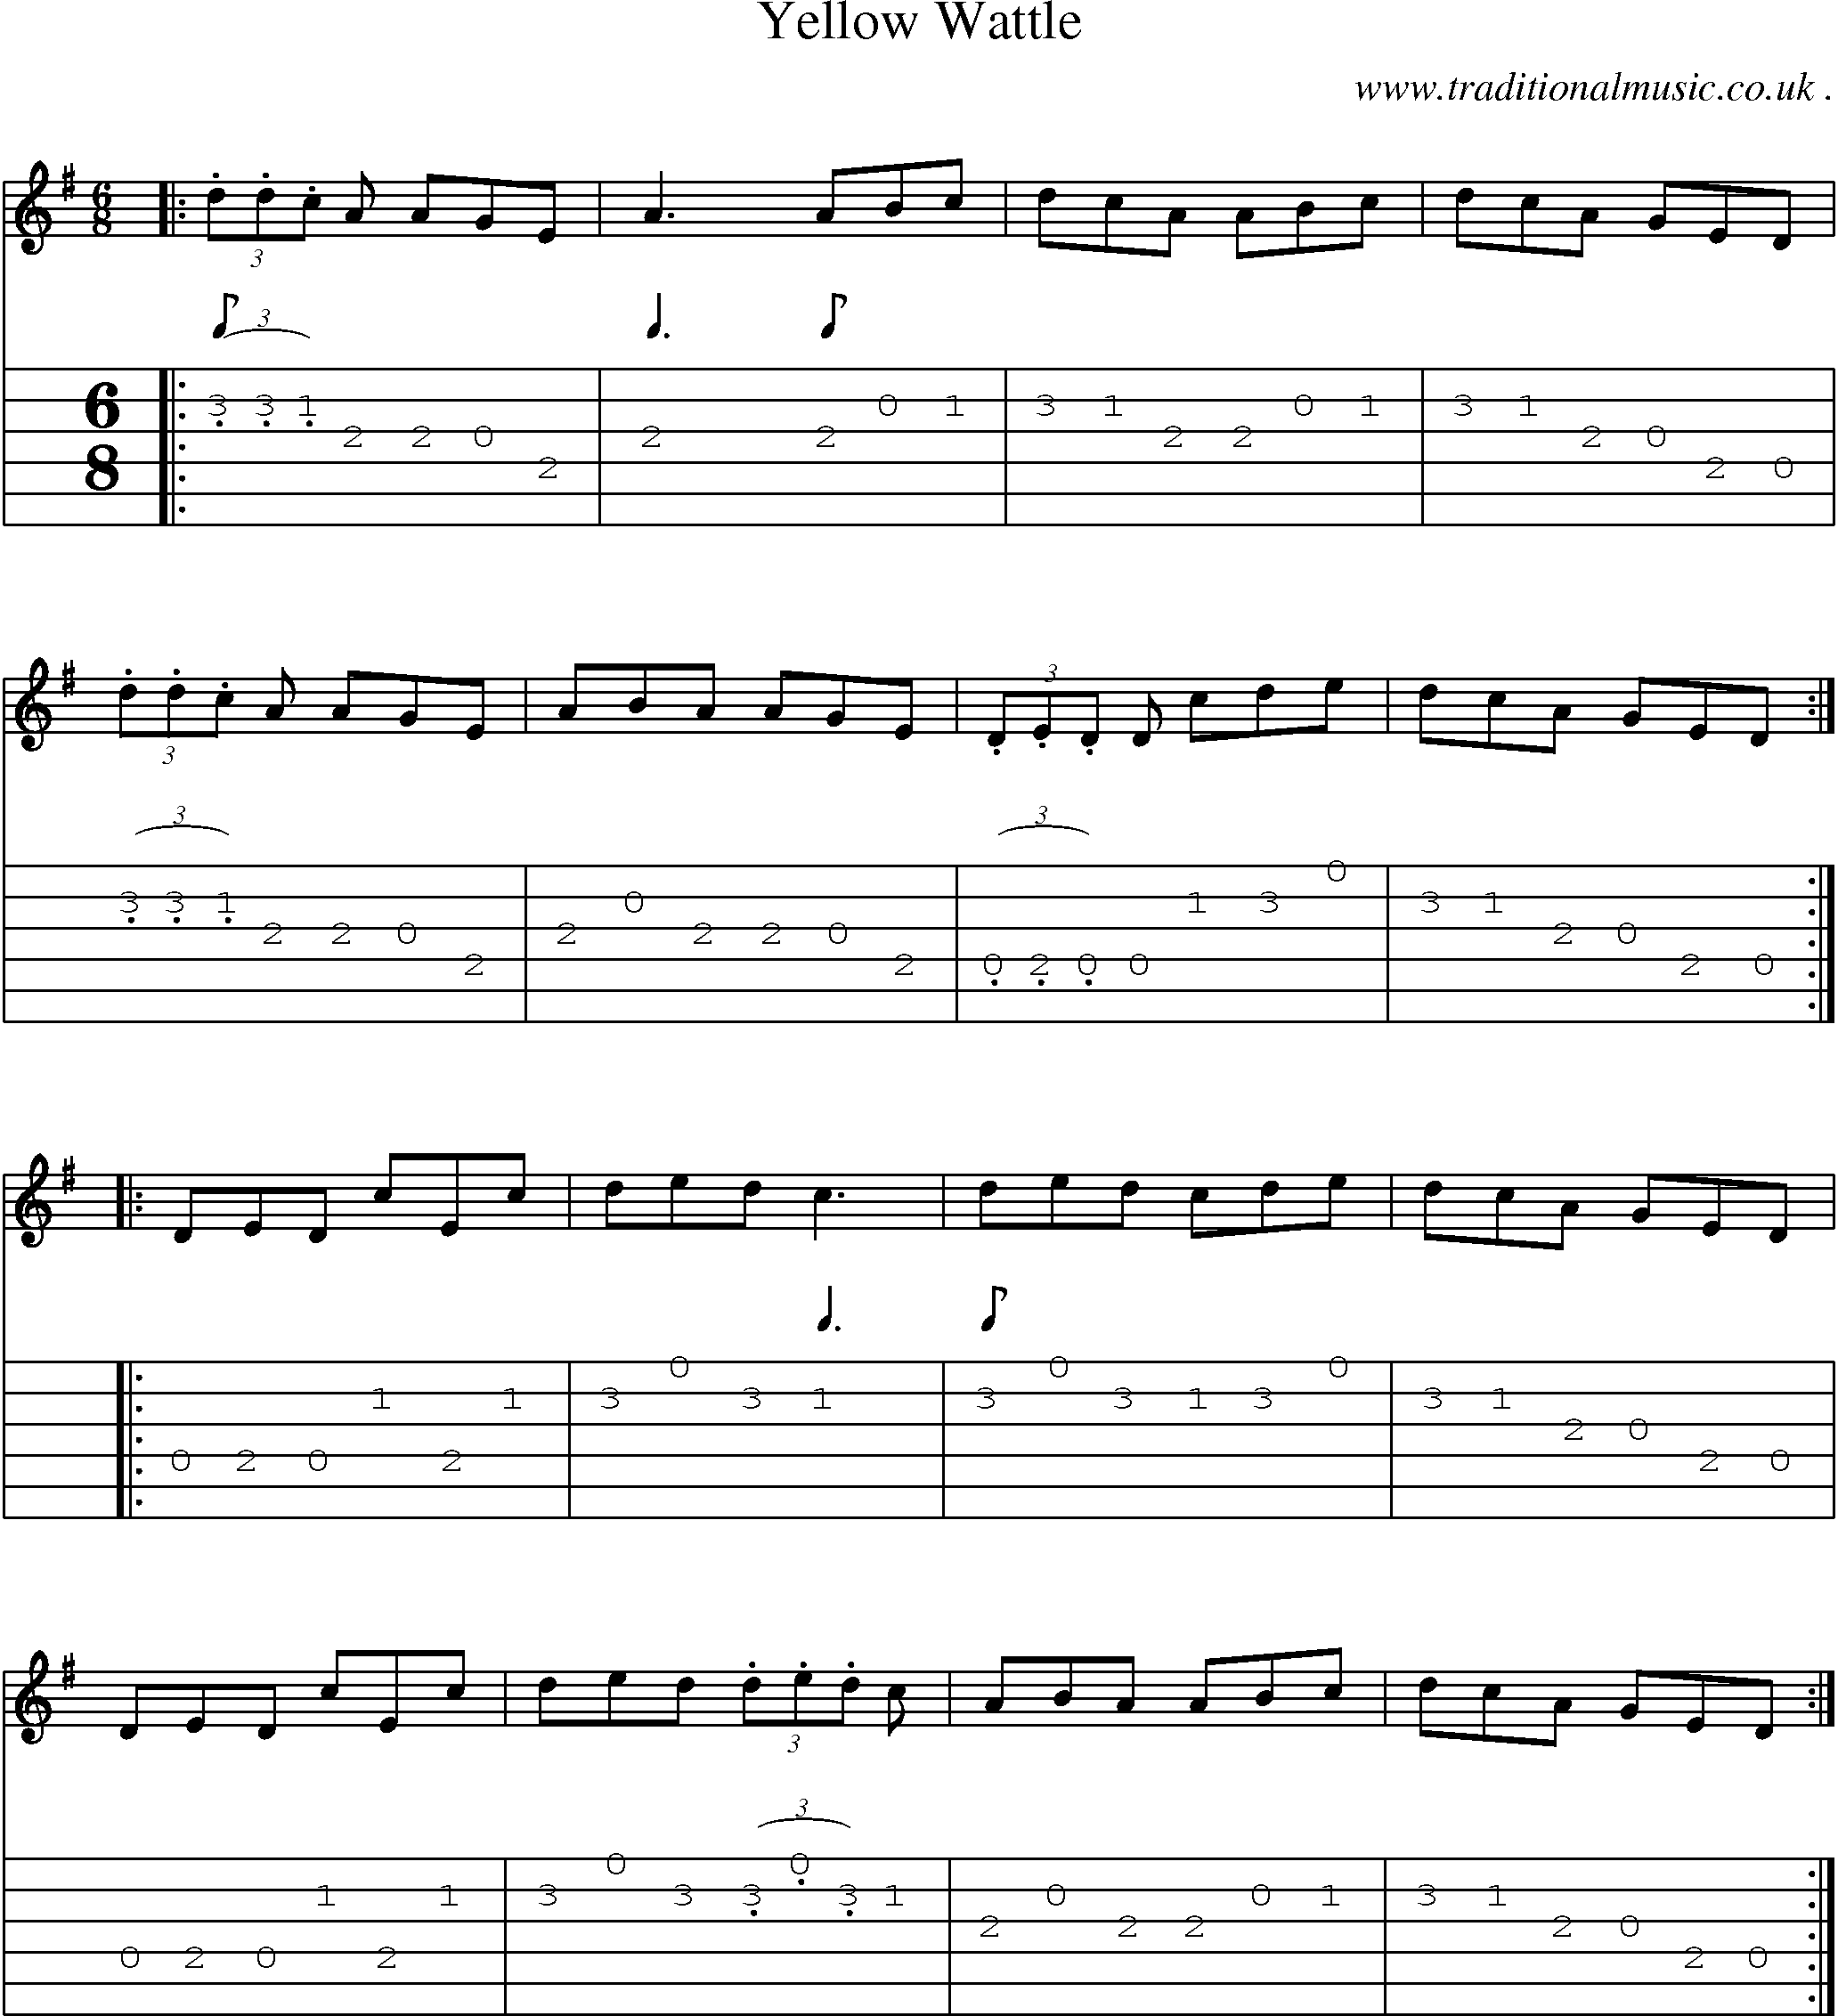 Sheet-Music and Guitar Tabs for Yellow Wattle